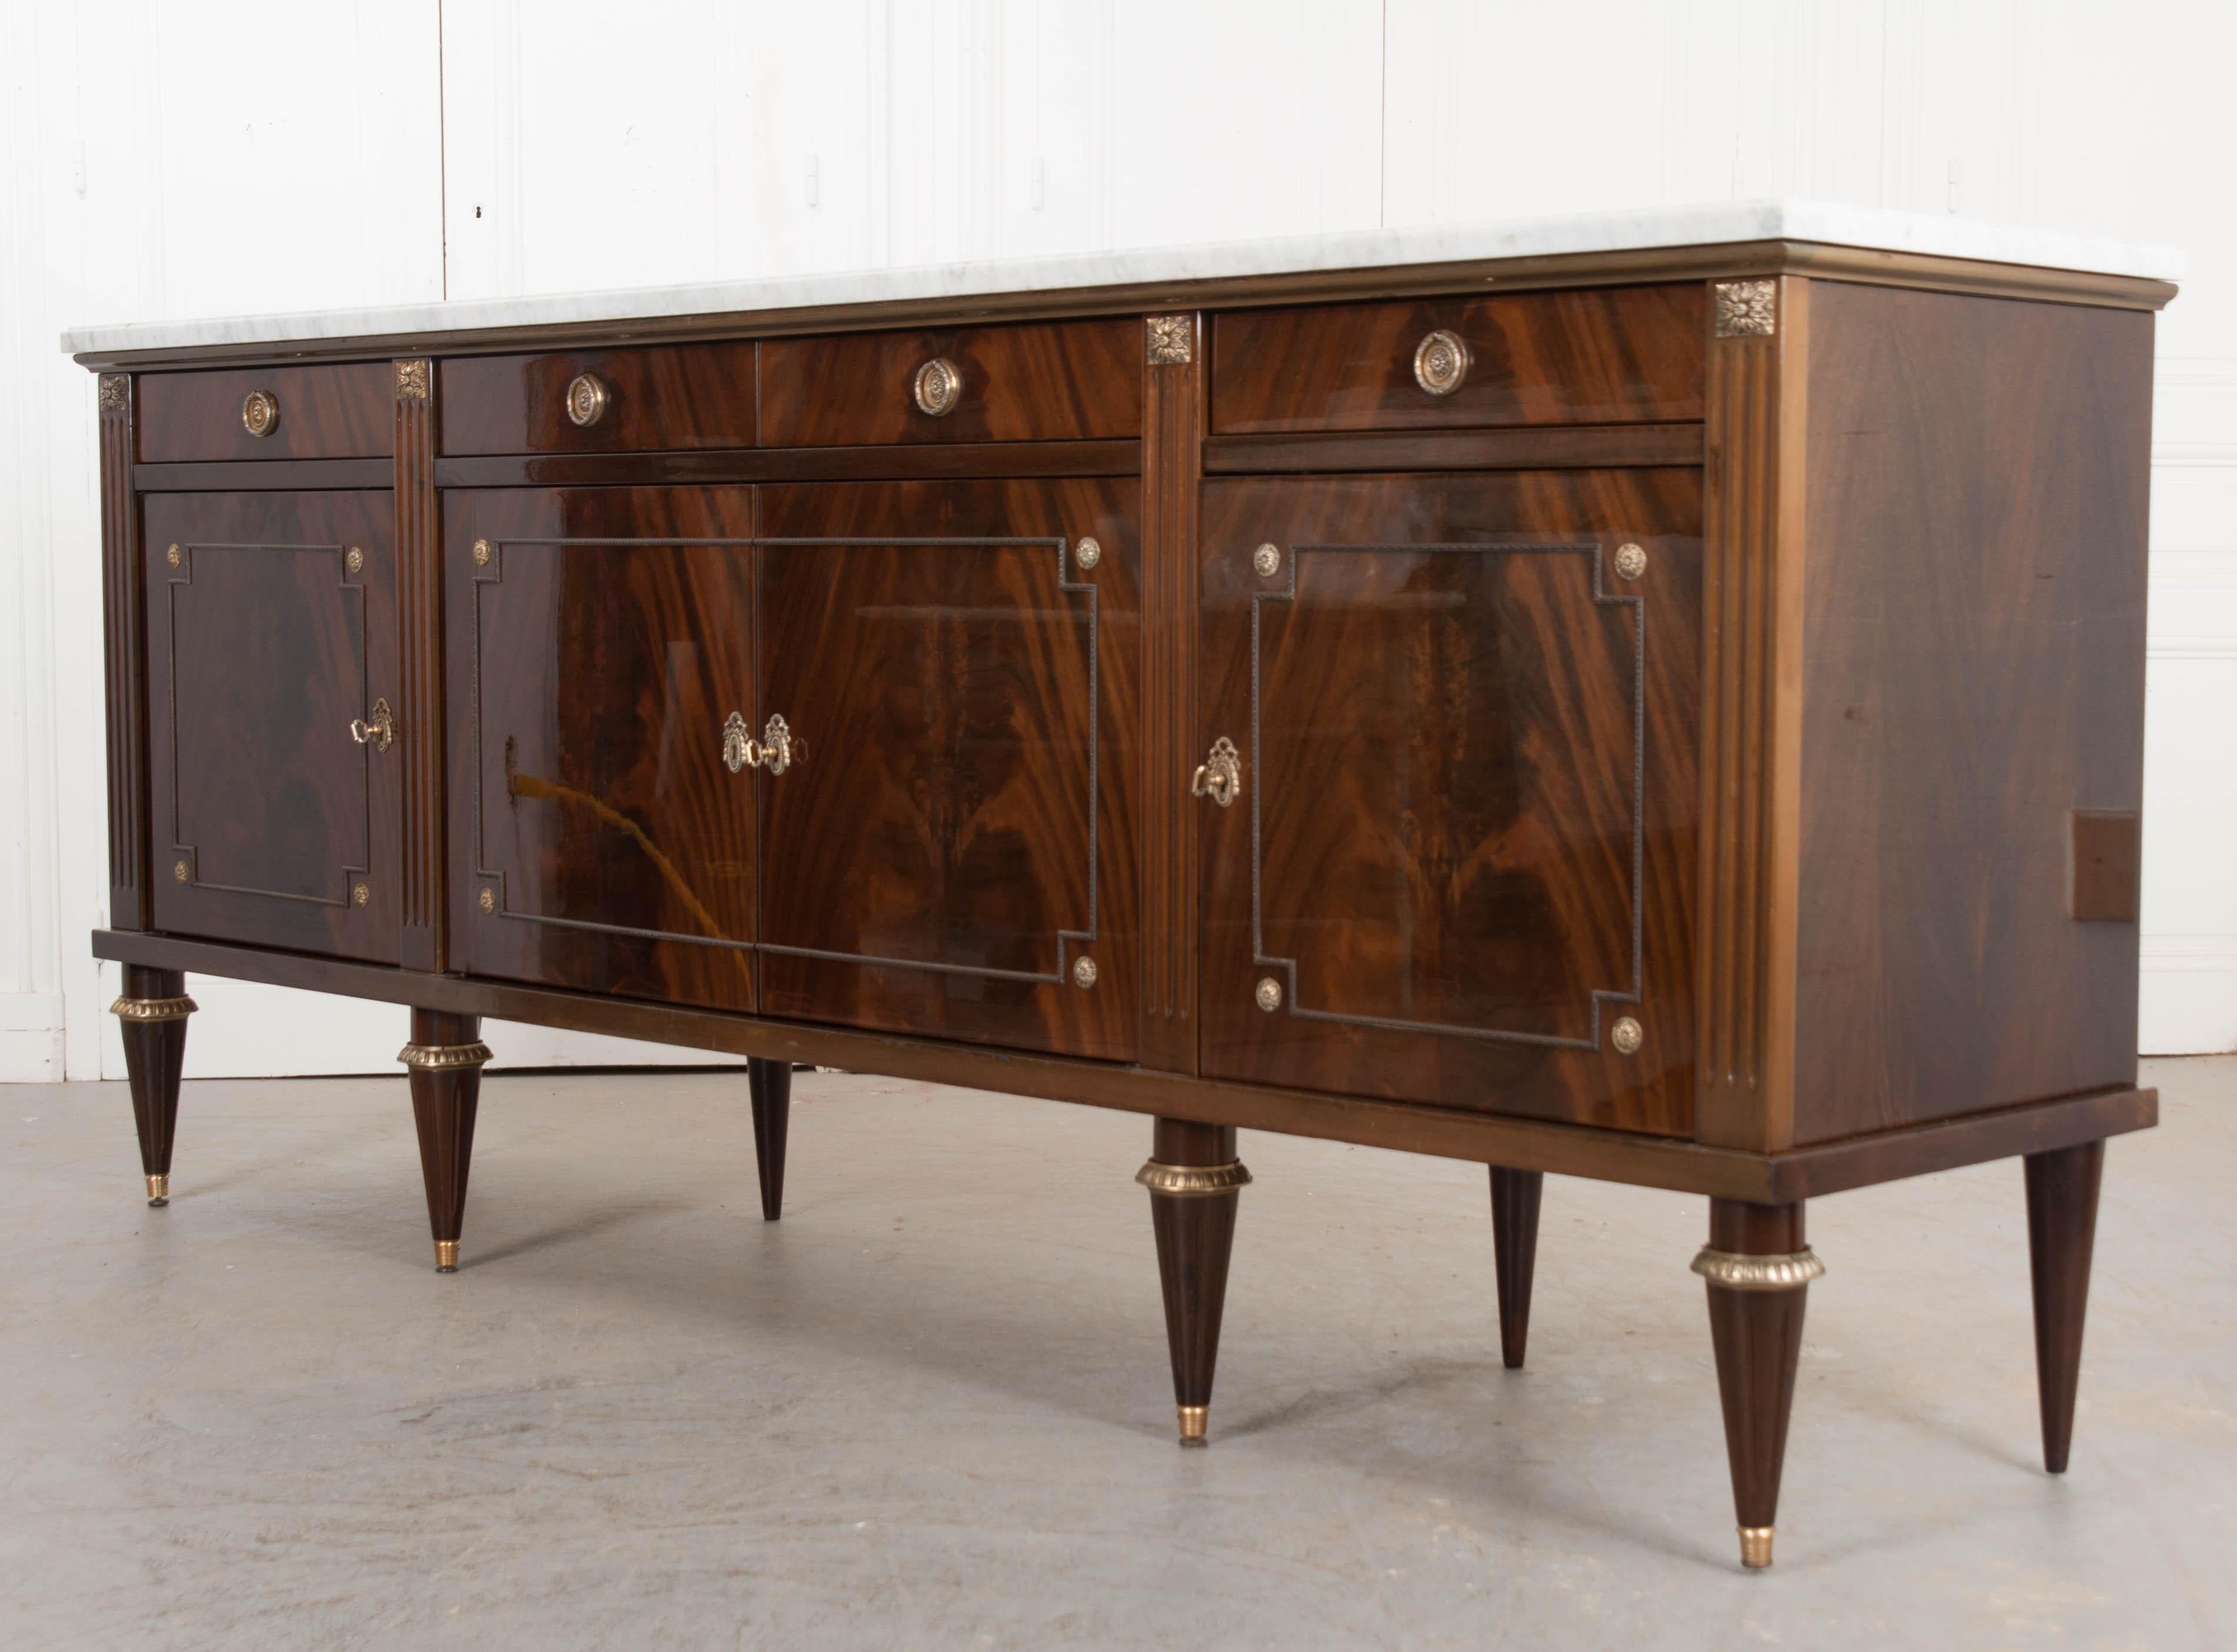 This fine Louis XVI-style vintage marble-top enfilade, circa 1950s, was found in France and features a beautiful high-gloss lacquer which highlights the exquisite book-matched mahogany veneer. The carved white marble top with grey veining rests